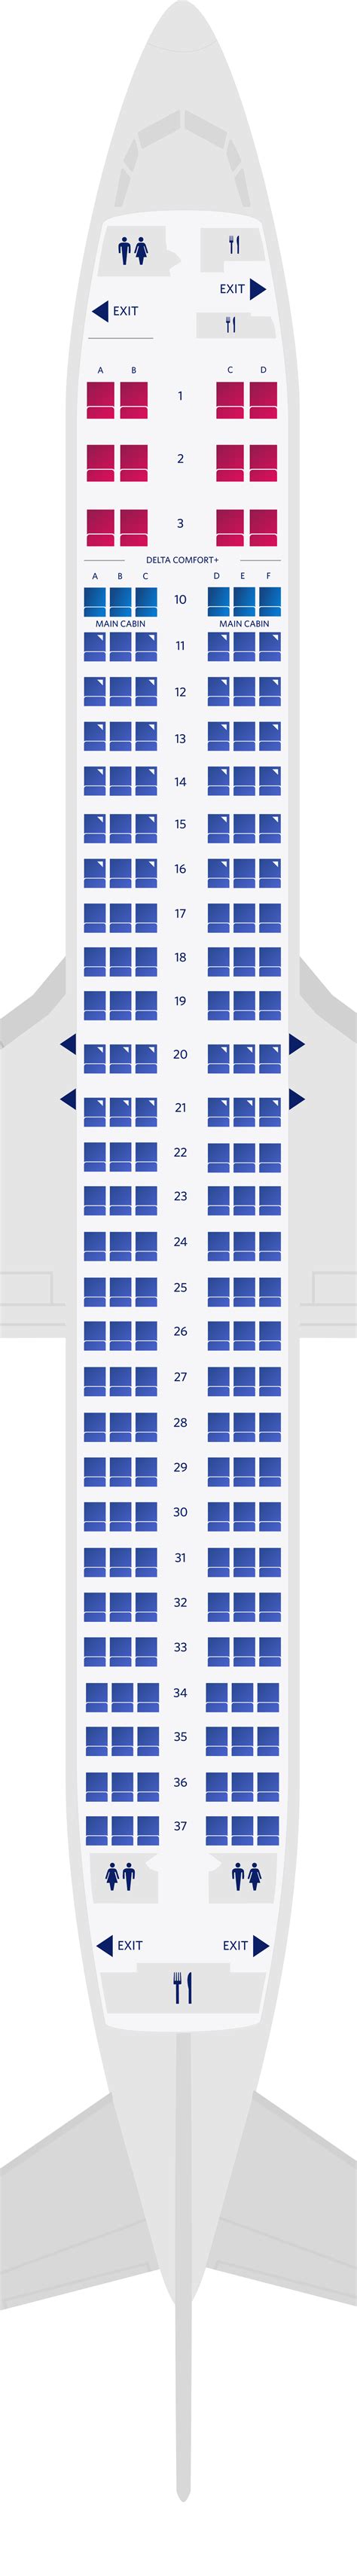 Boeing Seating Chart Delta Elcho Table